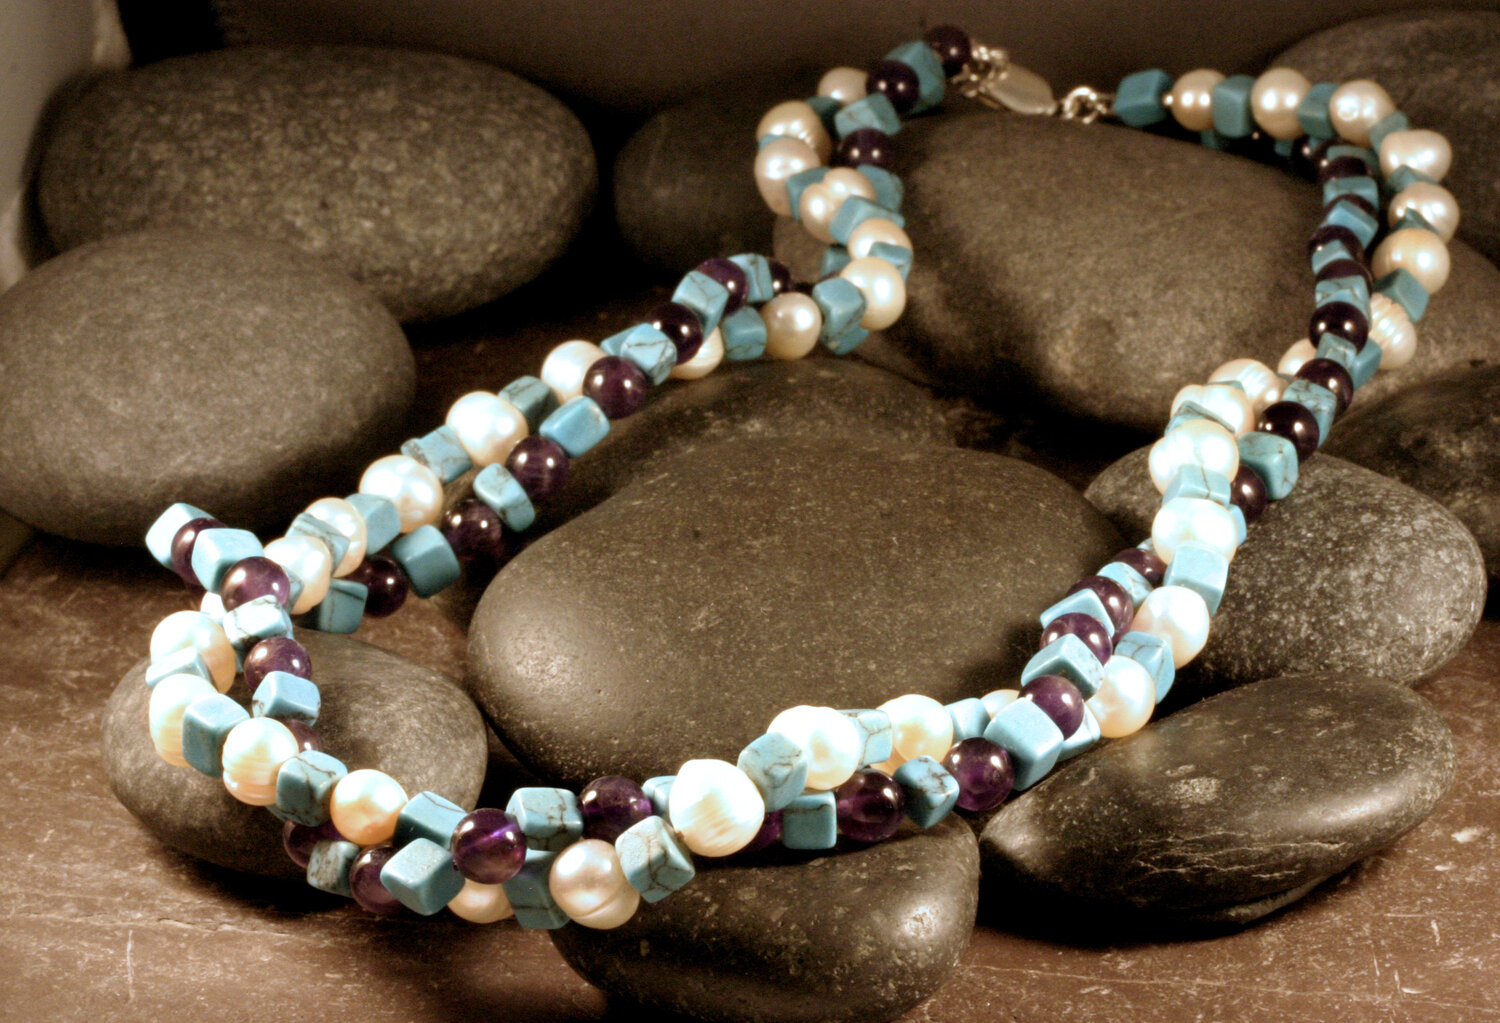 Sterling Silver Turquoise, Amethyst, Pearl Bead Double Strand Twist Necklace  — Designs By S&R